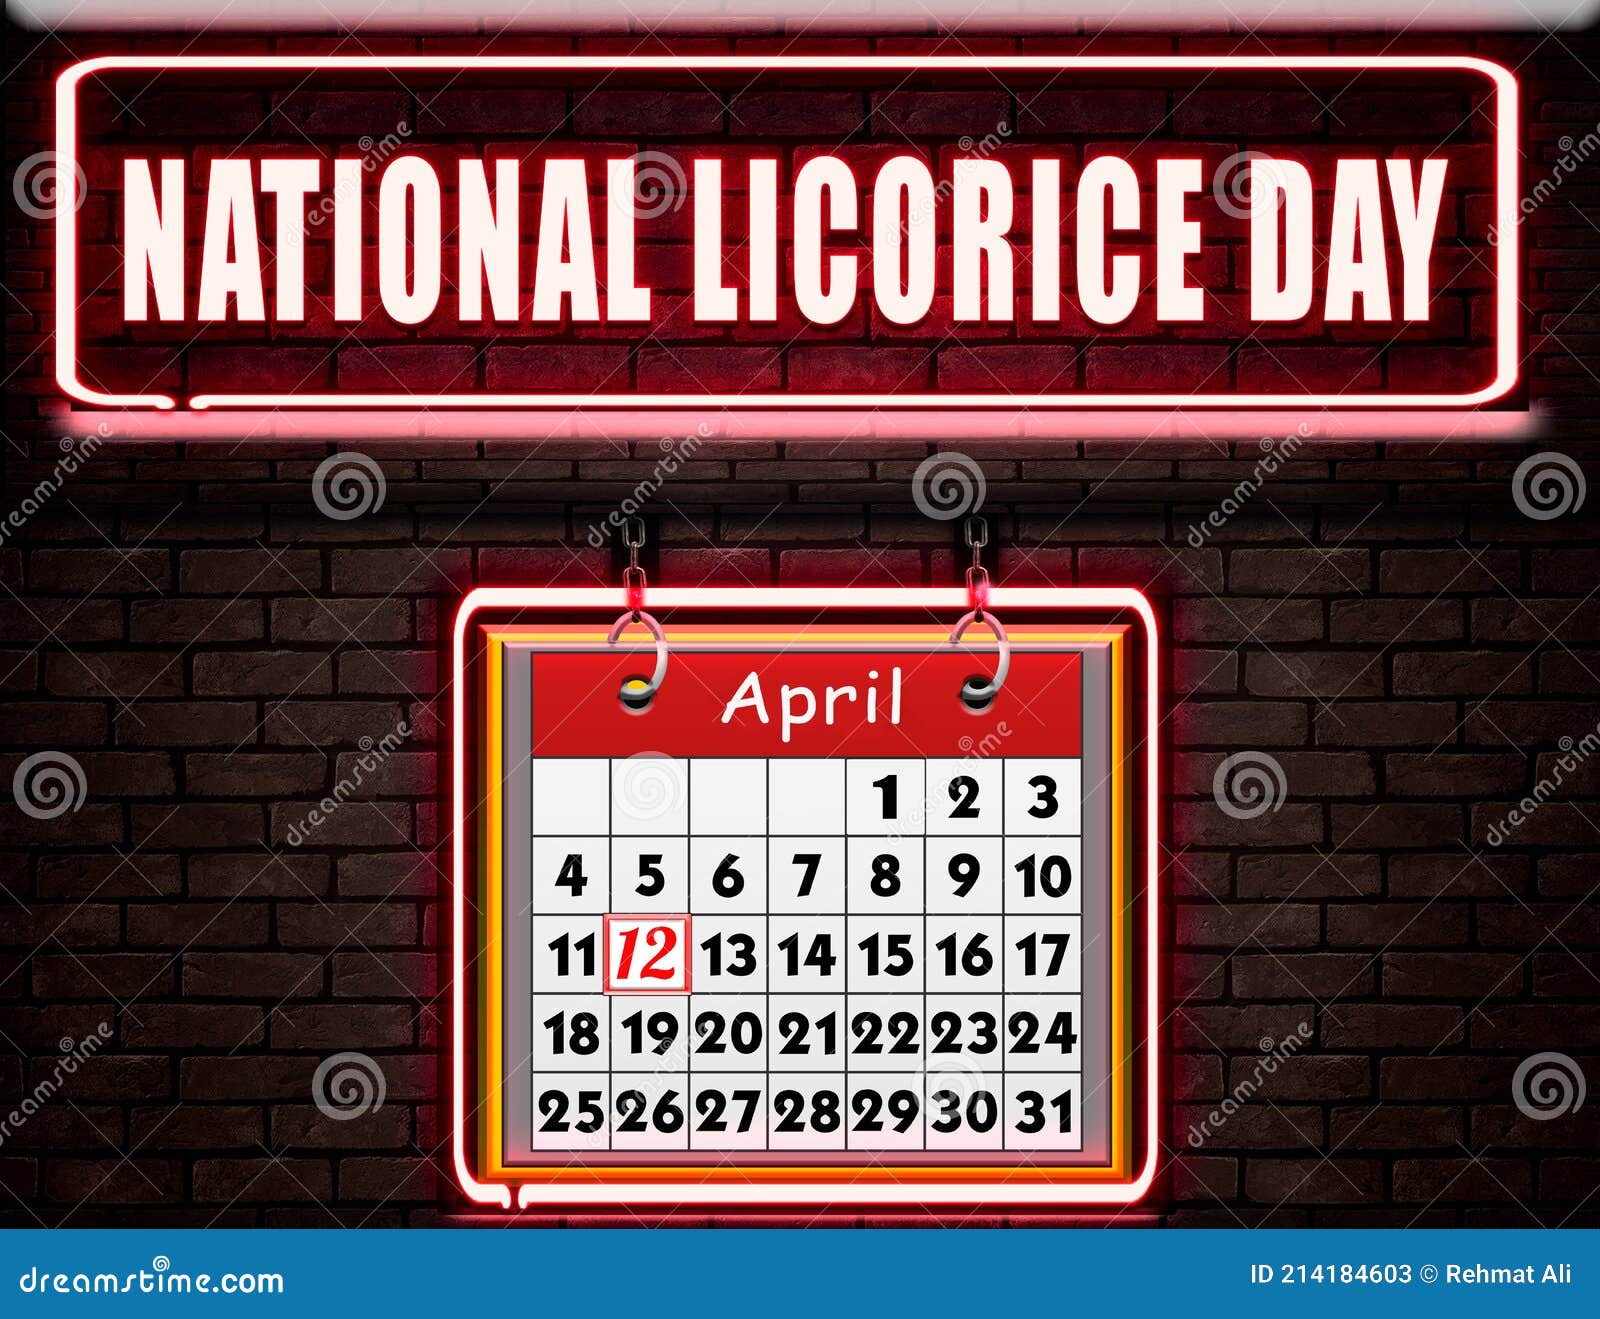 12 April , National Licorice Day, Neon Text Effect on Bricks Background